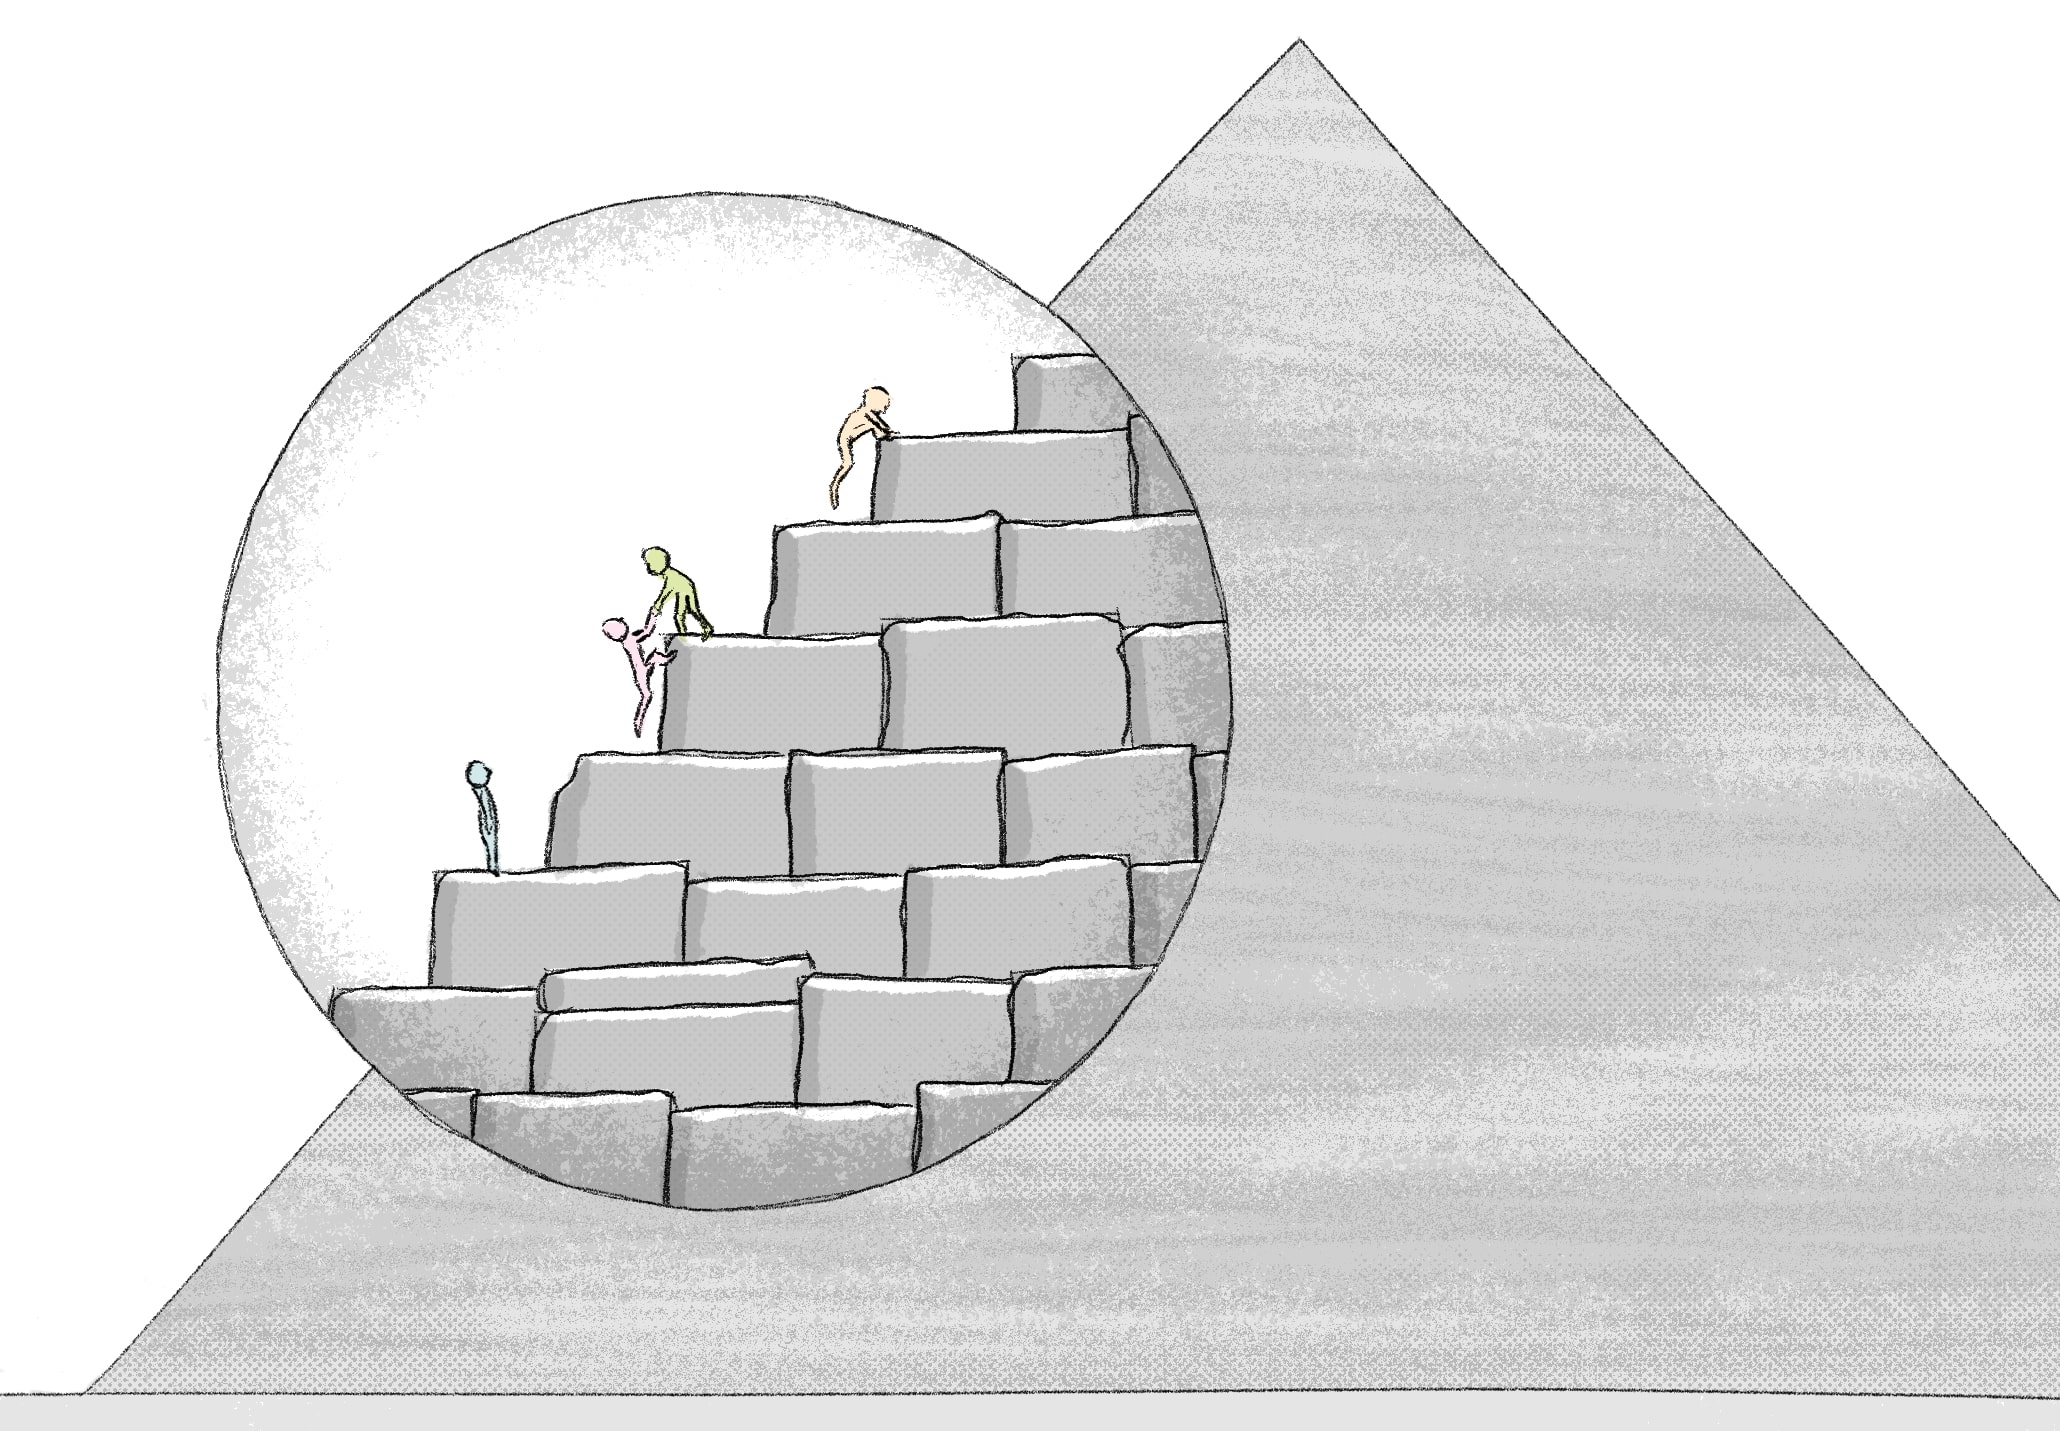 Journey to the top of Maslow's Pyramid